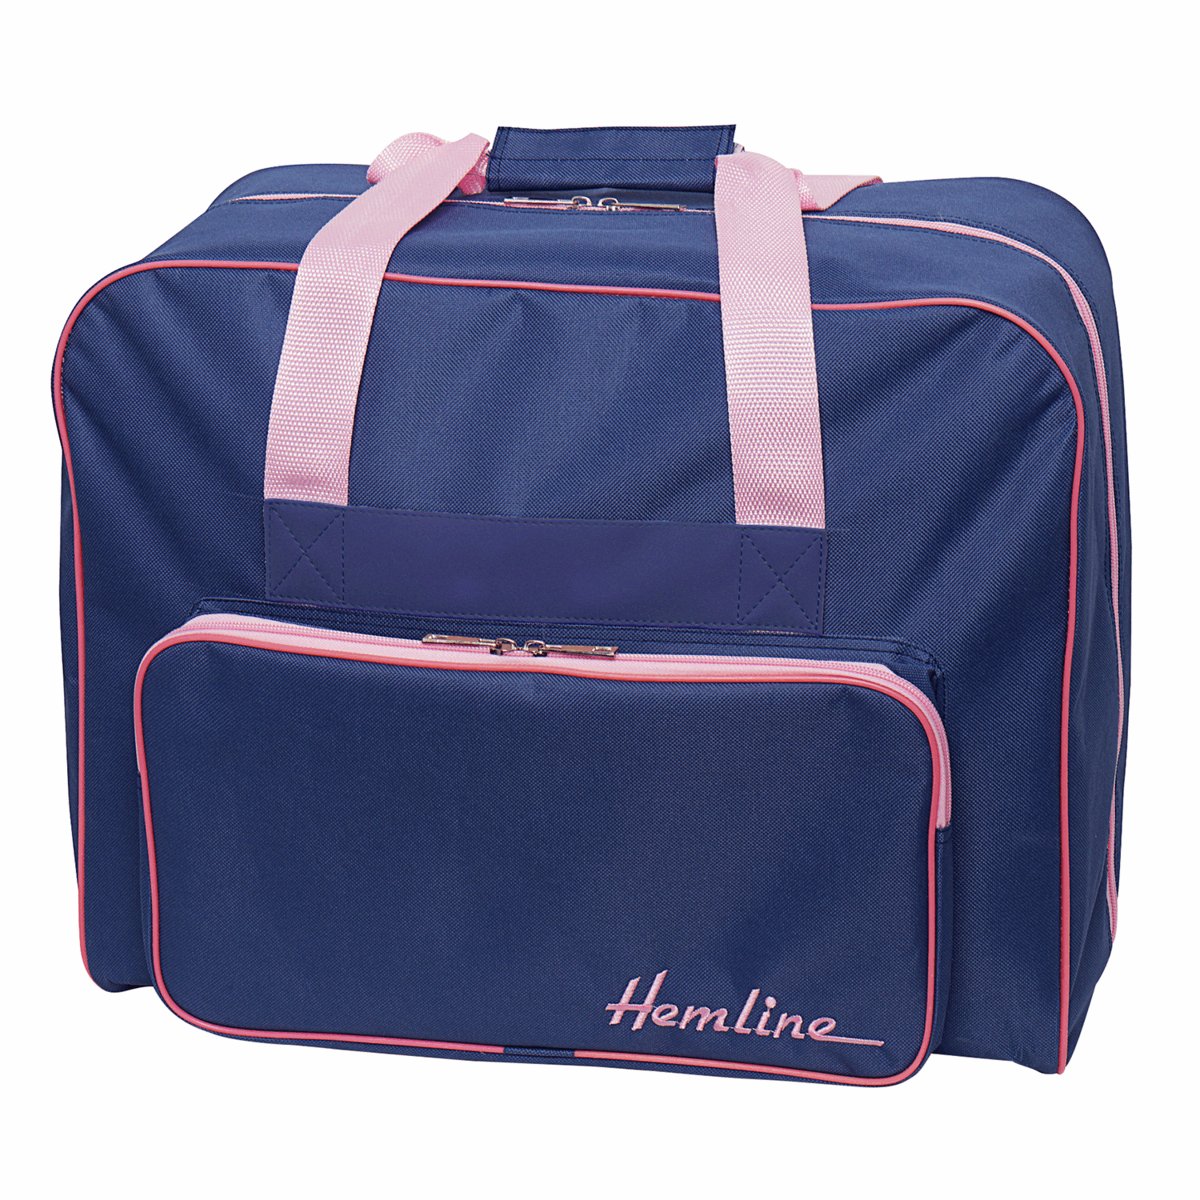 Luxury Blue and Pink Sewing Machine Bag